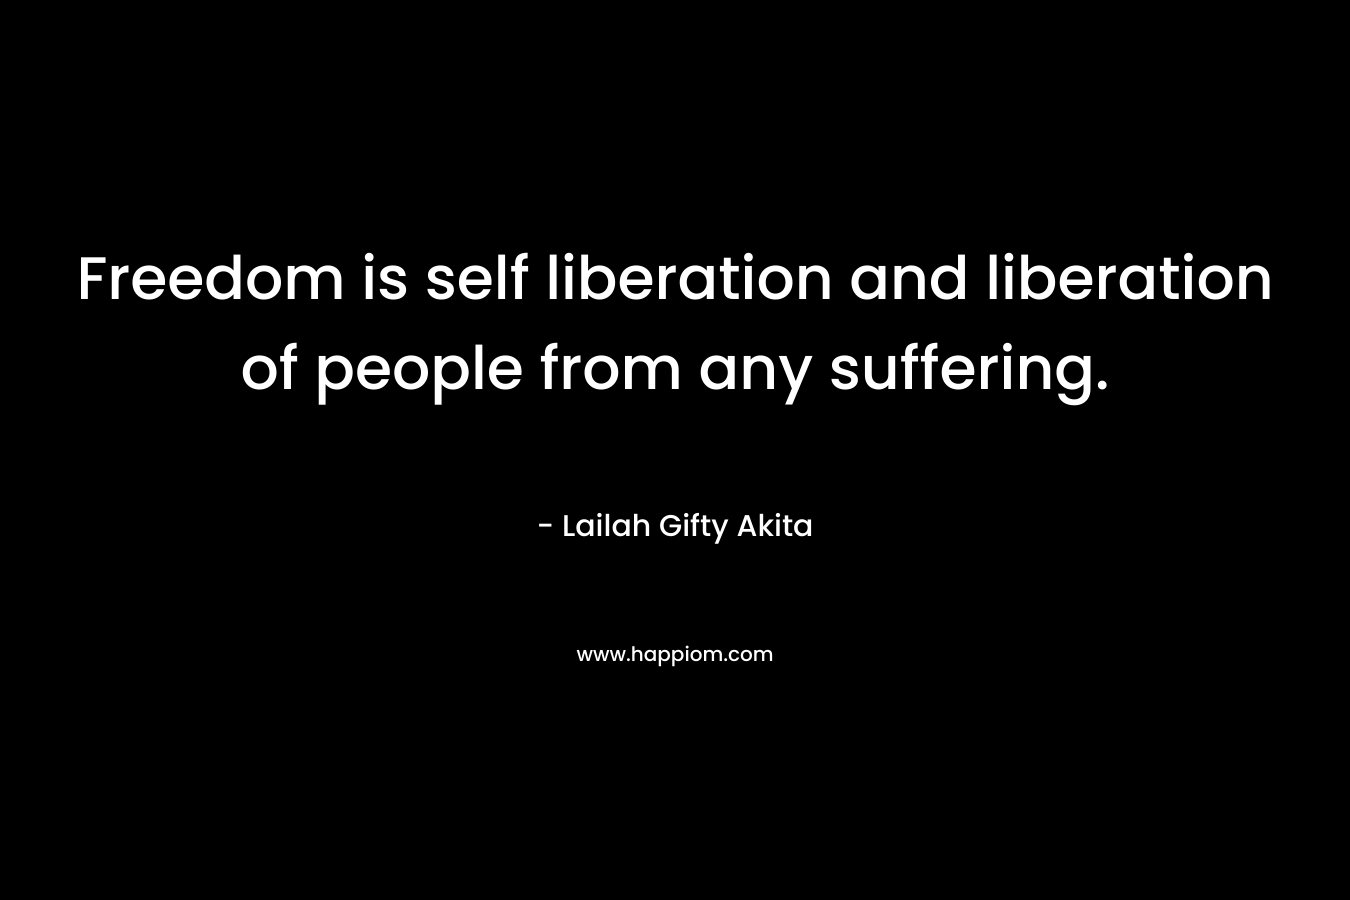 Freedom is self liberation and liberation of people from any suffering.